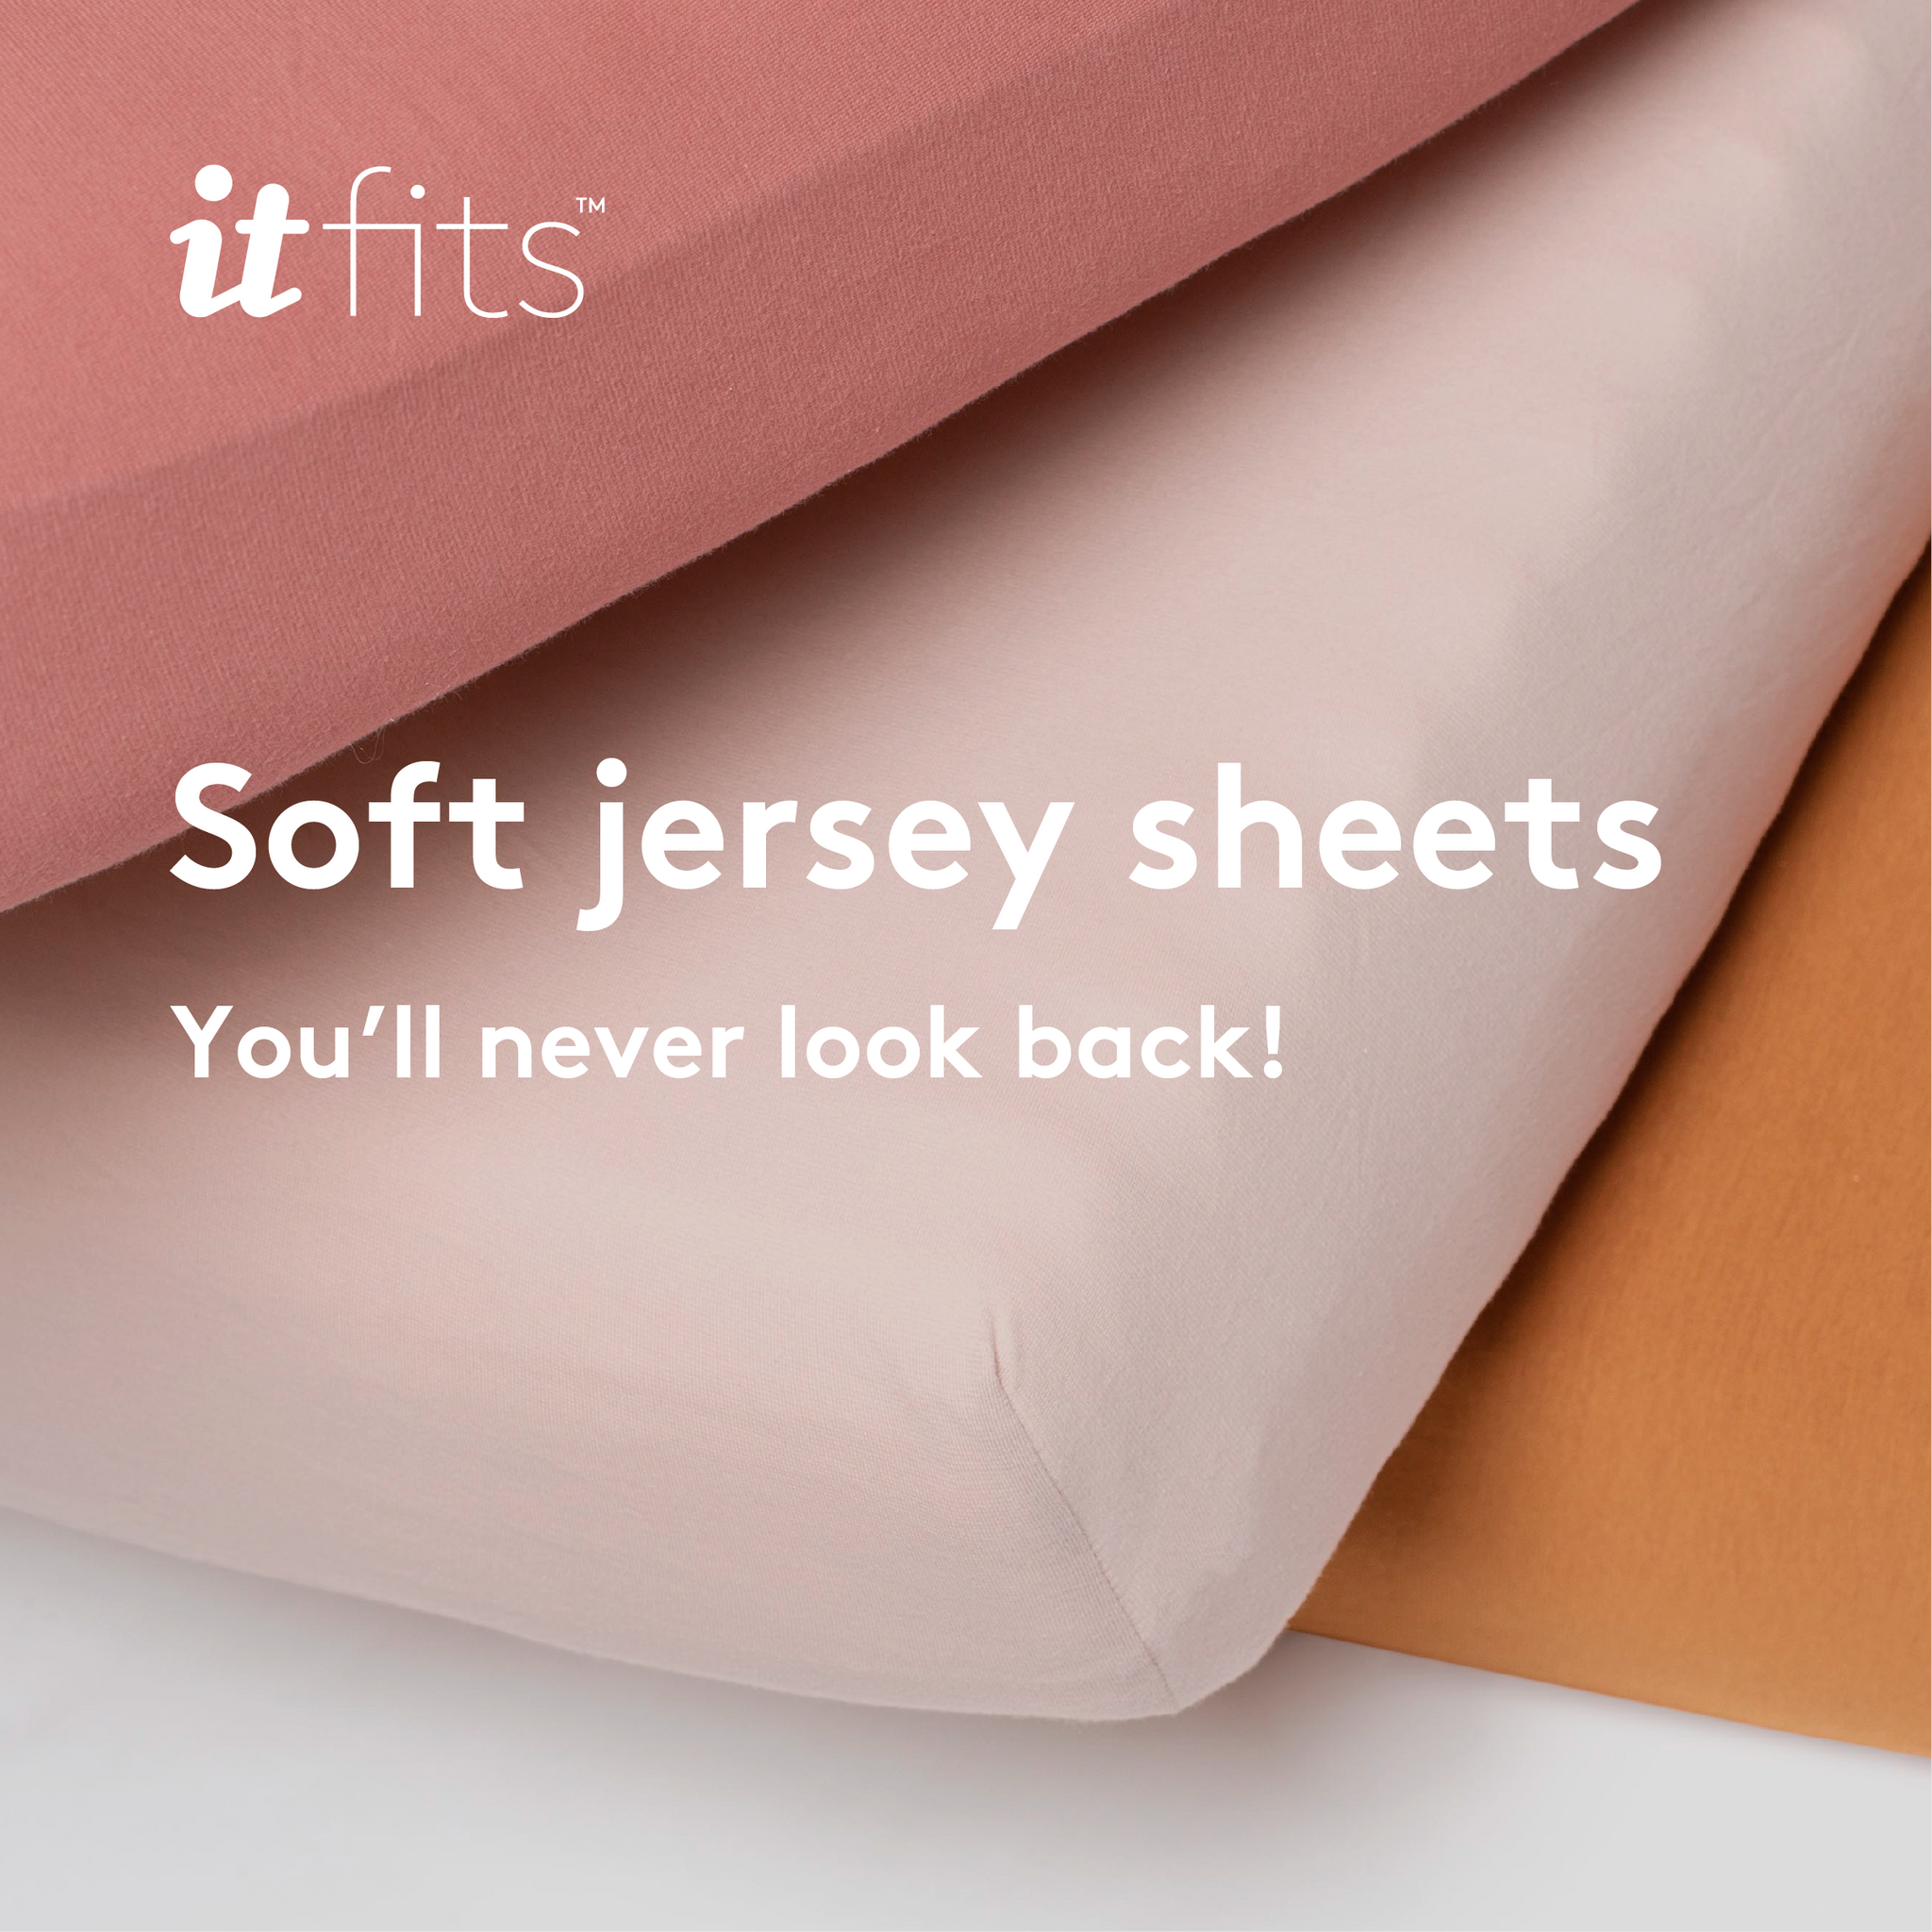 Fitted Sheet | Buy A Fitted Sheet: Online & In Store From Itfits